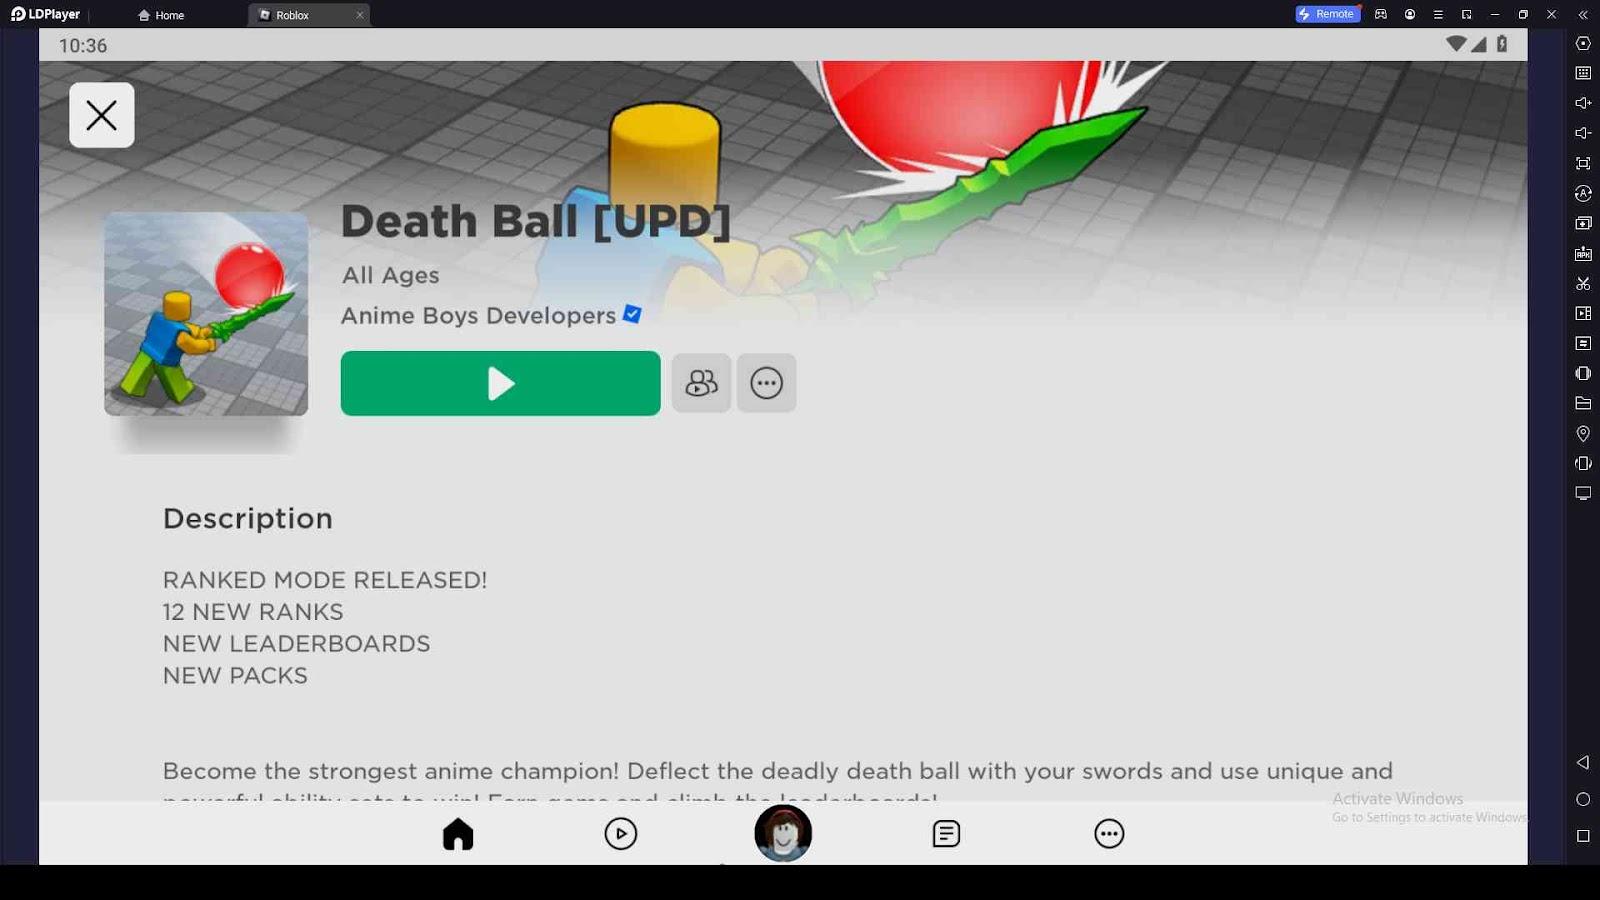 Playing Roblox Death Ball on LDPlayer